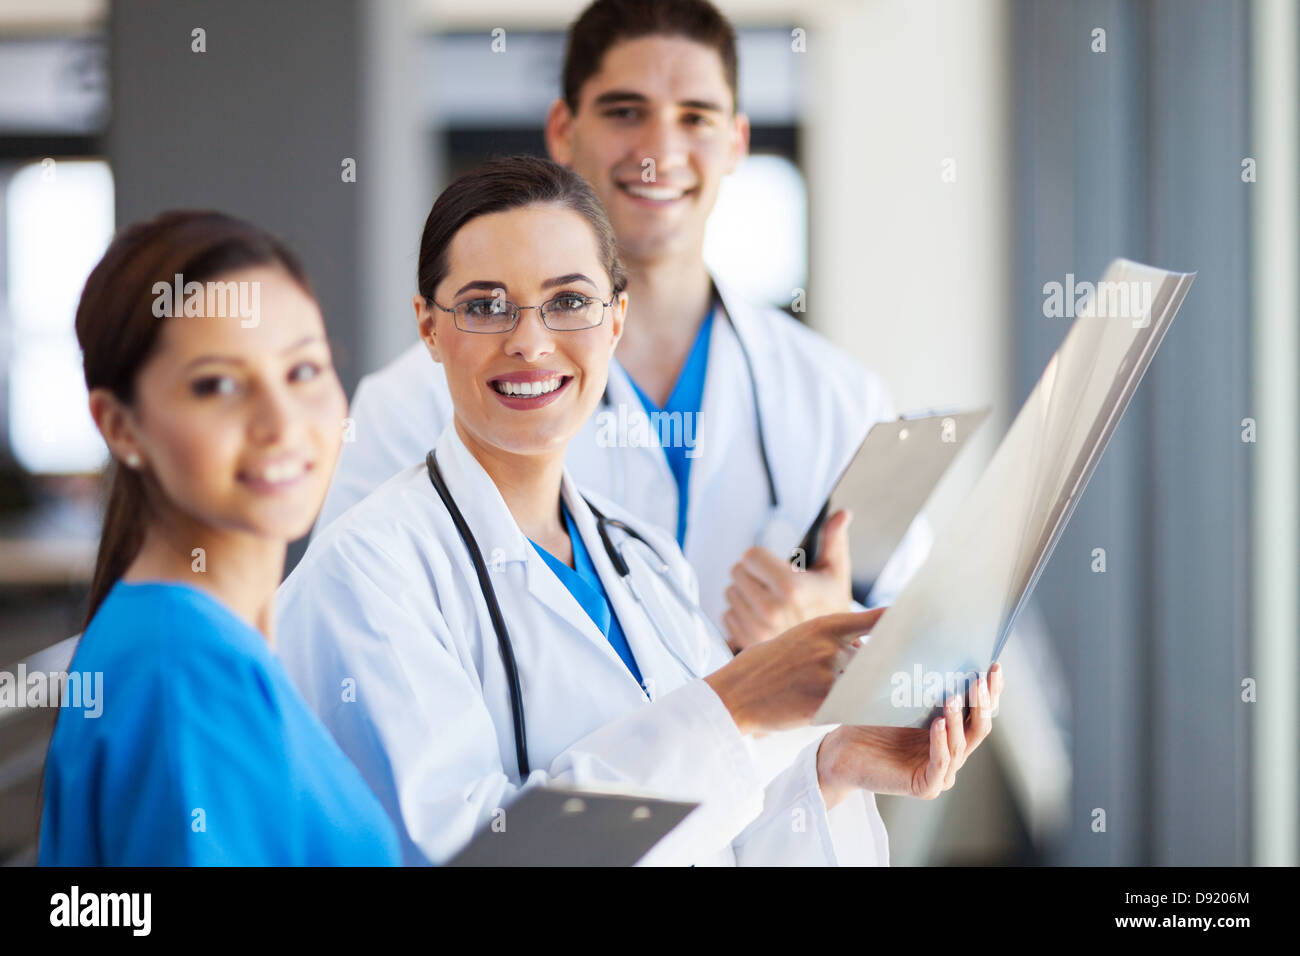 group of medical workers working together Stock Photo